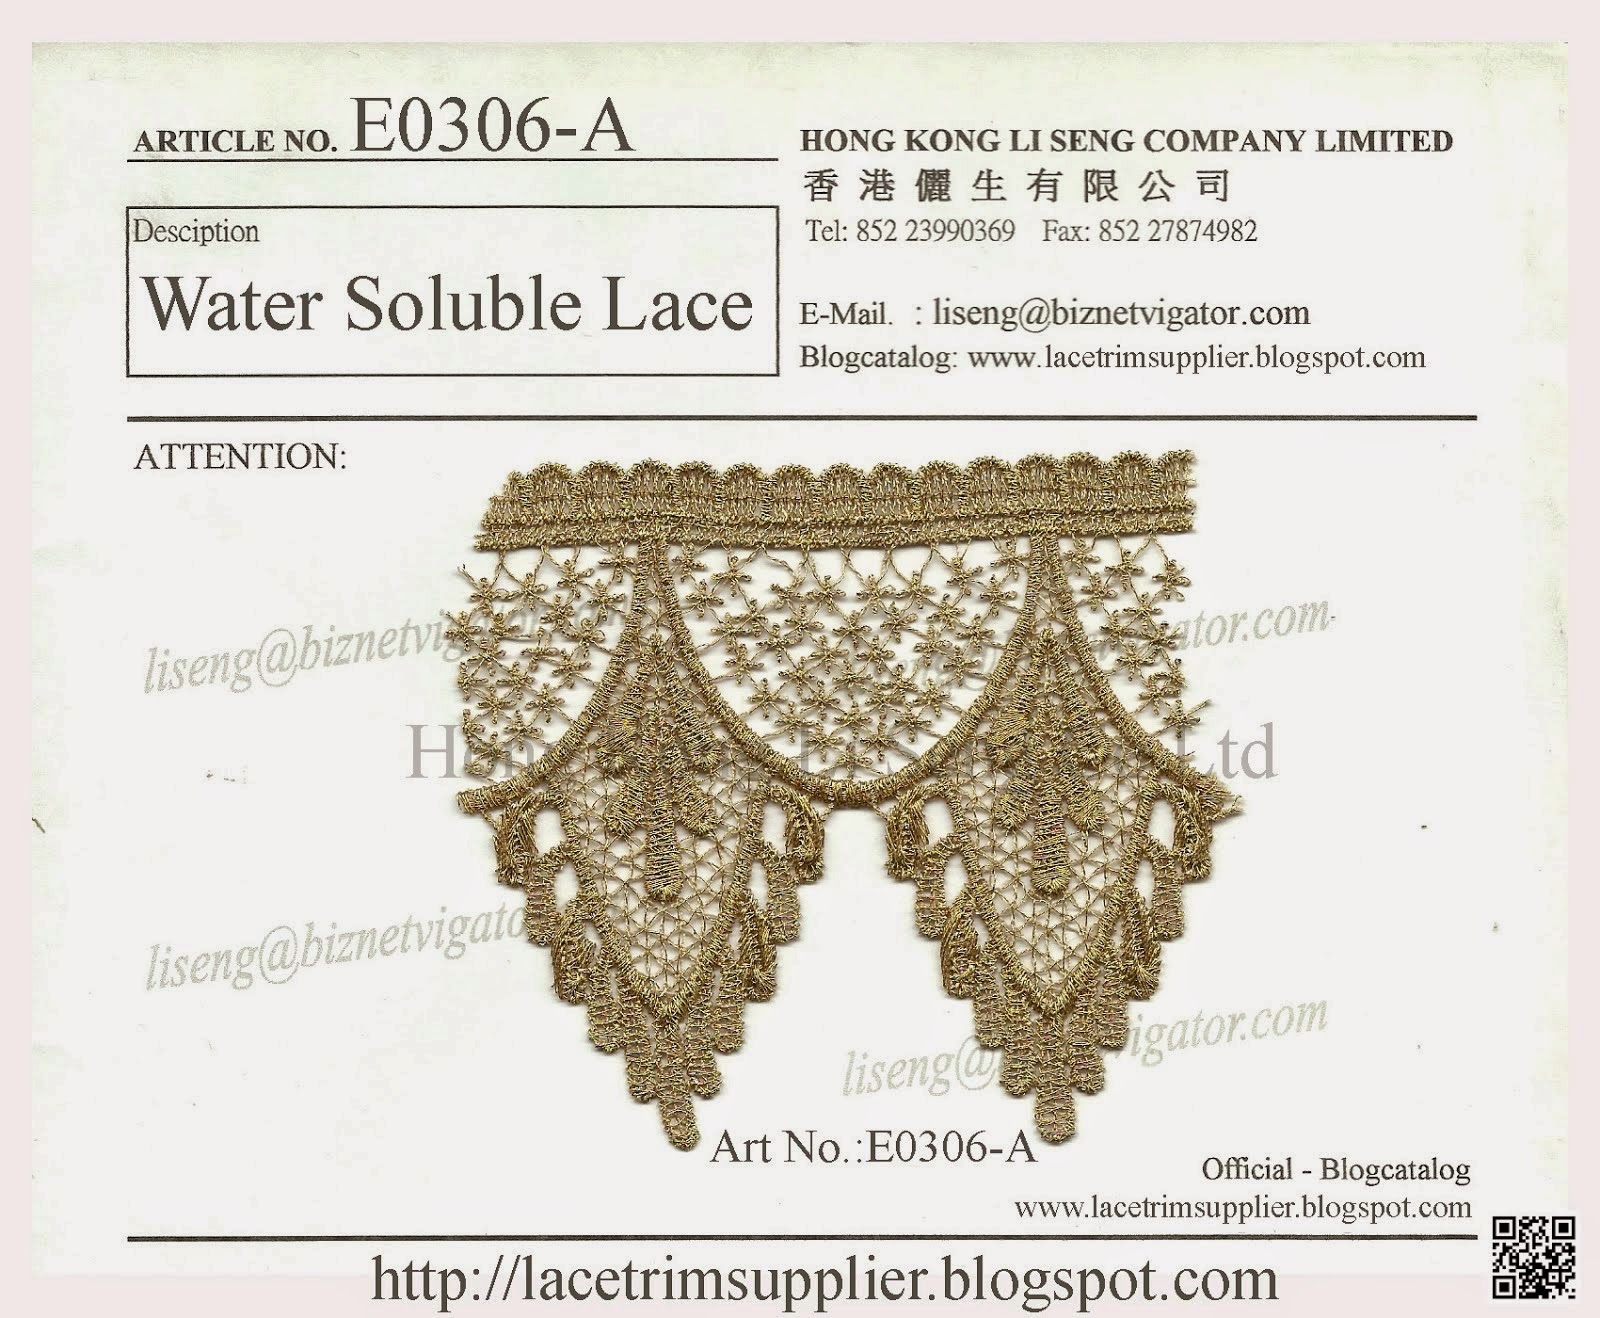 Golden Lurex Water Soluble Lace Manufacturer